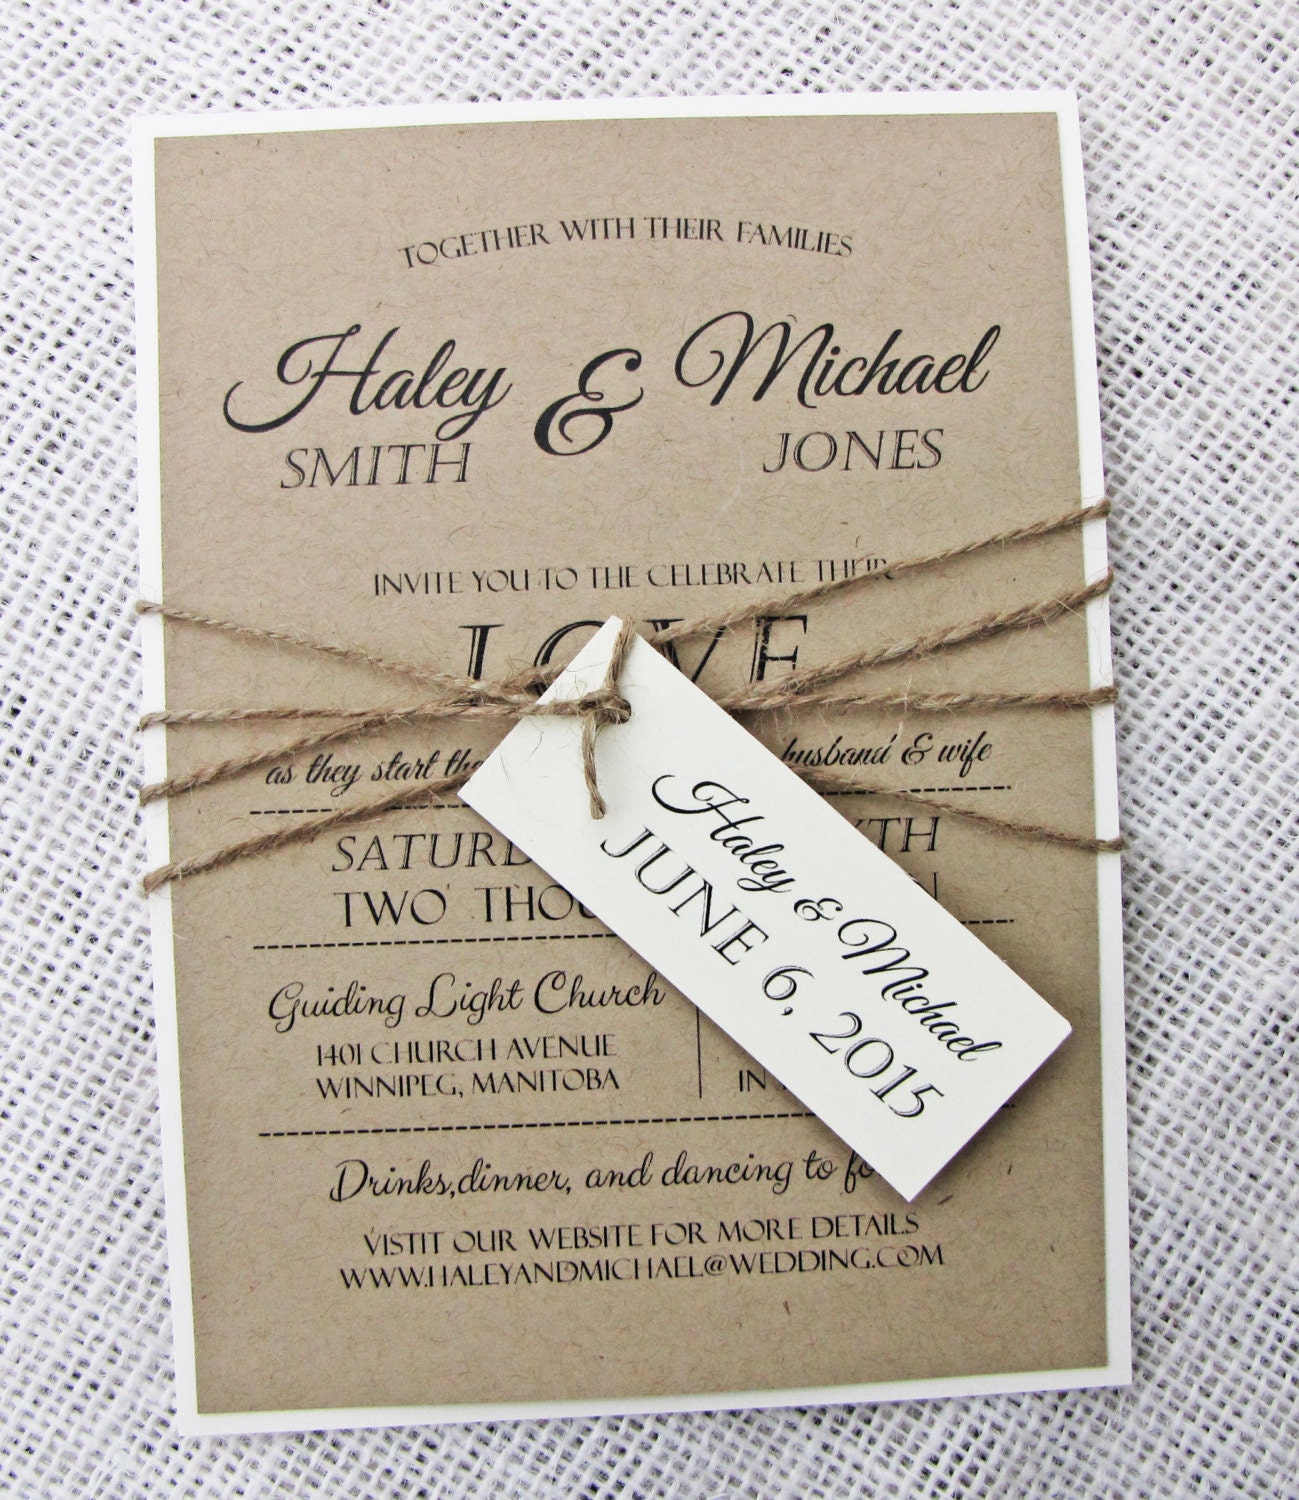 how-to-make-rustic-wedding-invitations-rustic-wood-lace-wedding-invitation-from-1-00-each